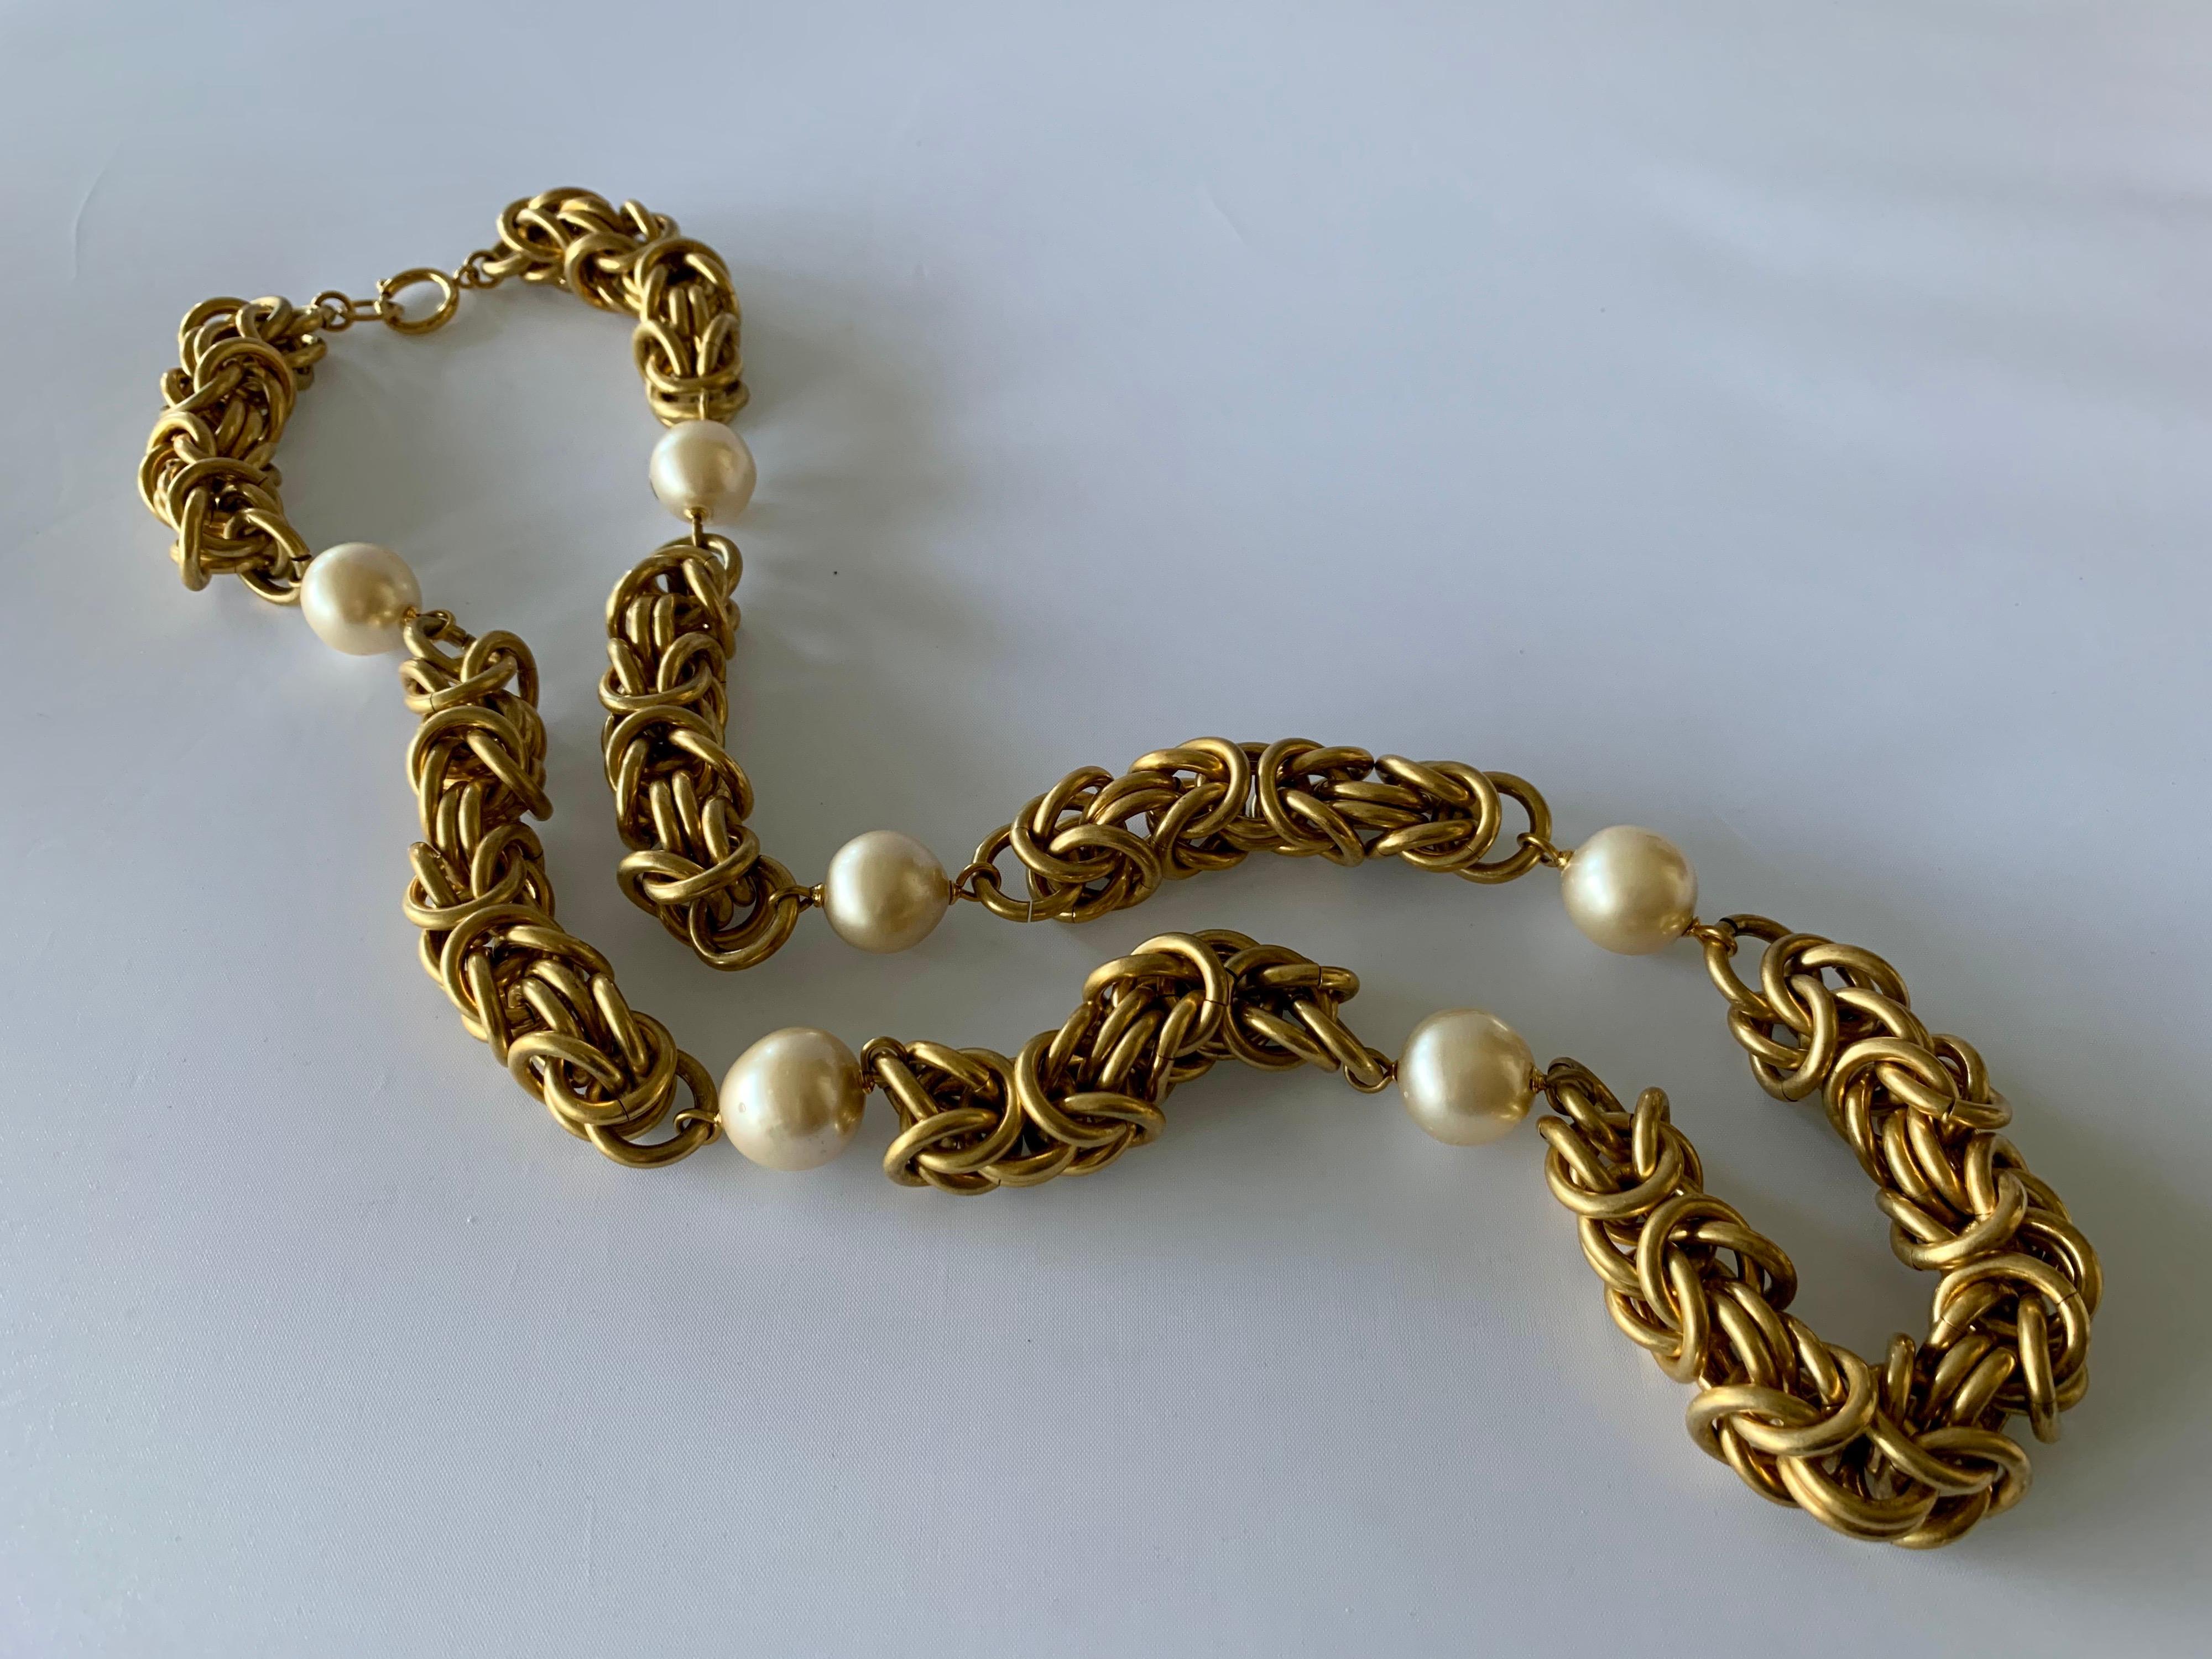 Bead Vintage Jumbo Chanel Gold and Pearl Runway Necklace 